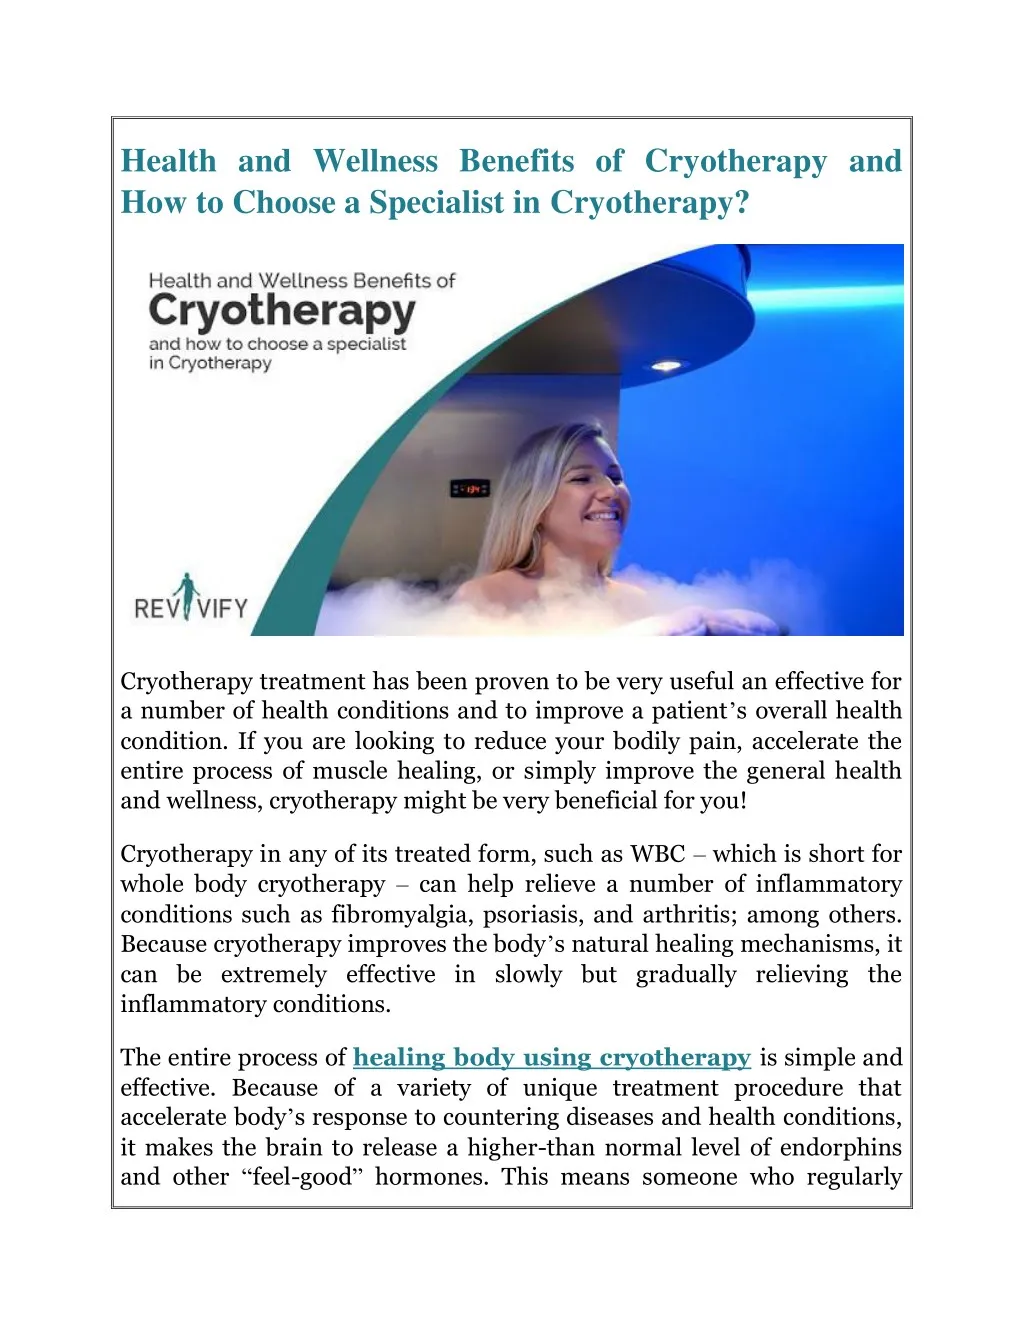 health and wellness benefits of cryotherapy